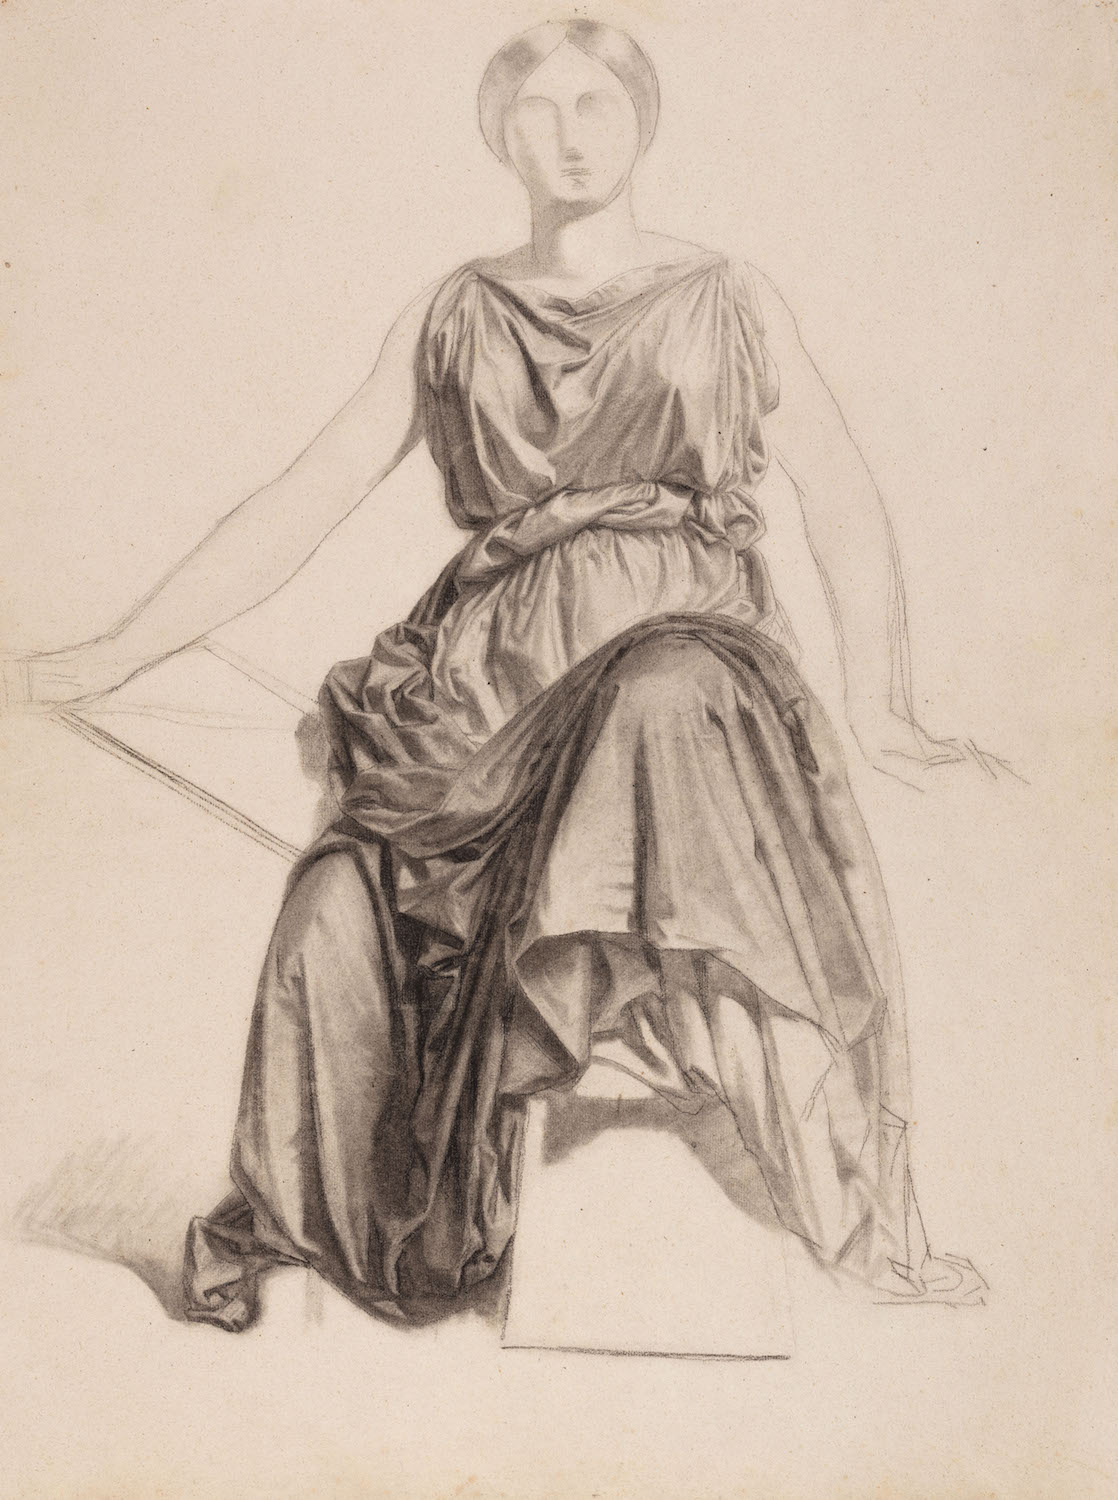 Charles Negre - Figure Drawing of a Woman and the Drapery of Her Dress